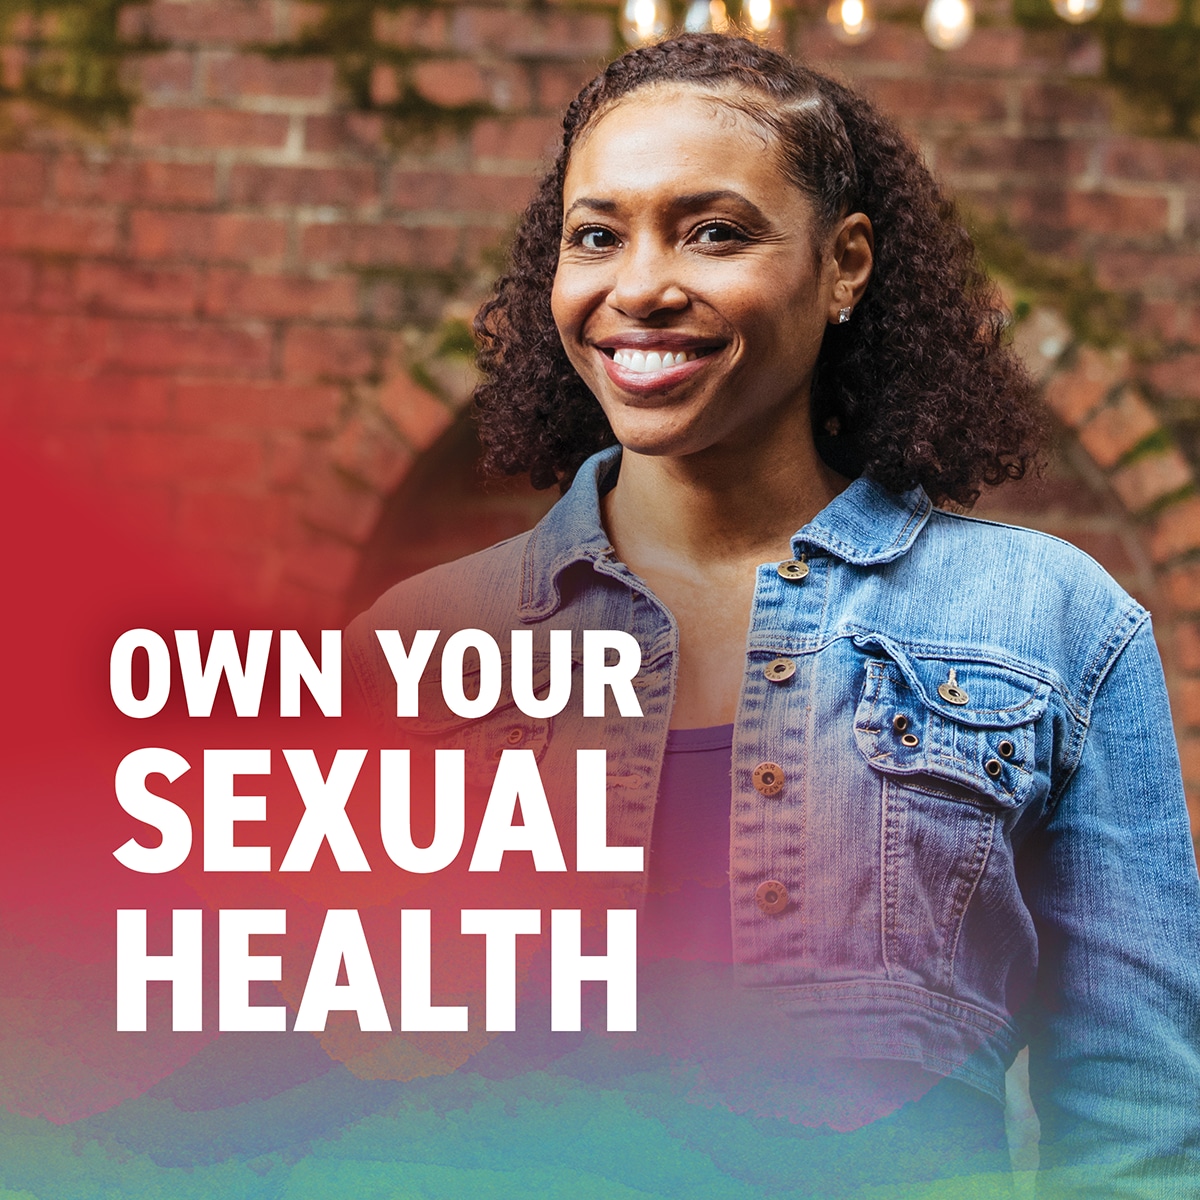 Own your sexual health.